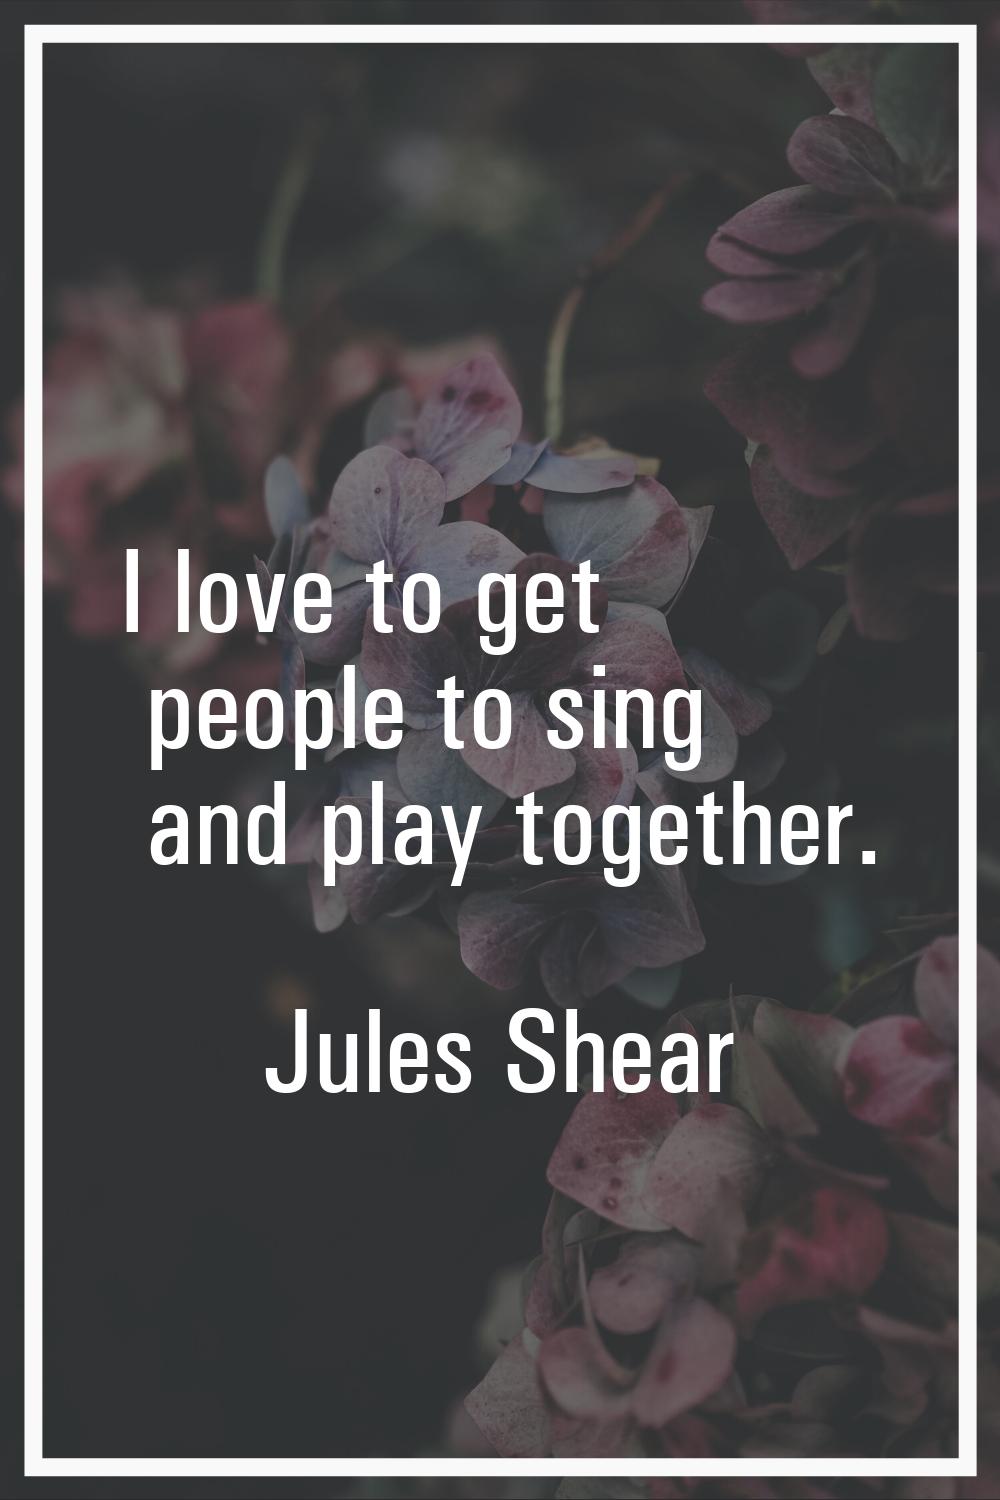 I love to get people to sing and play together.